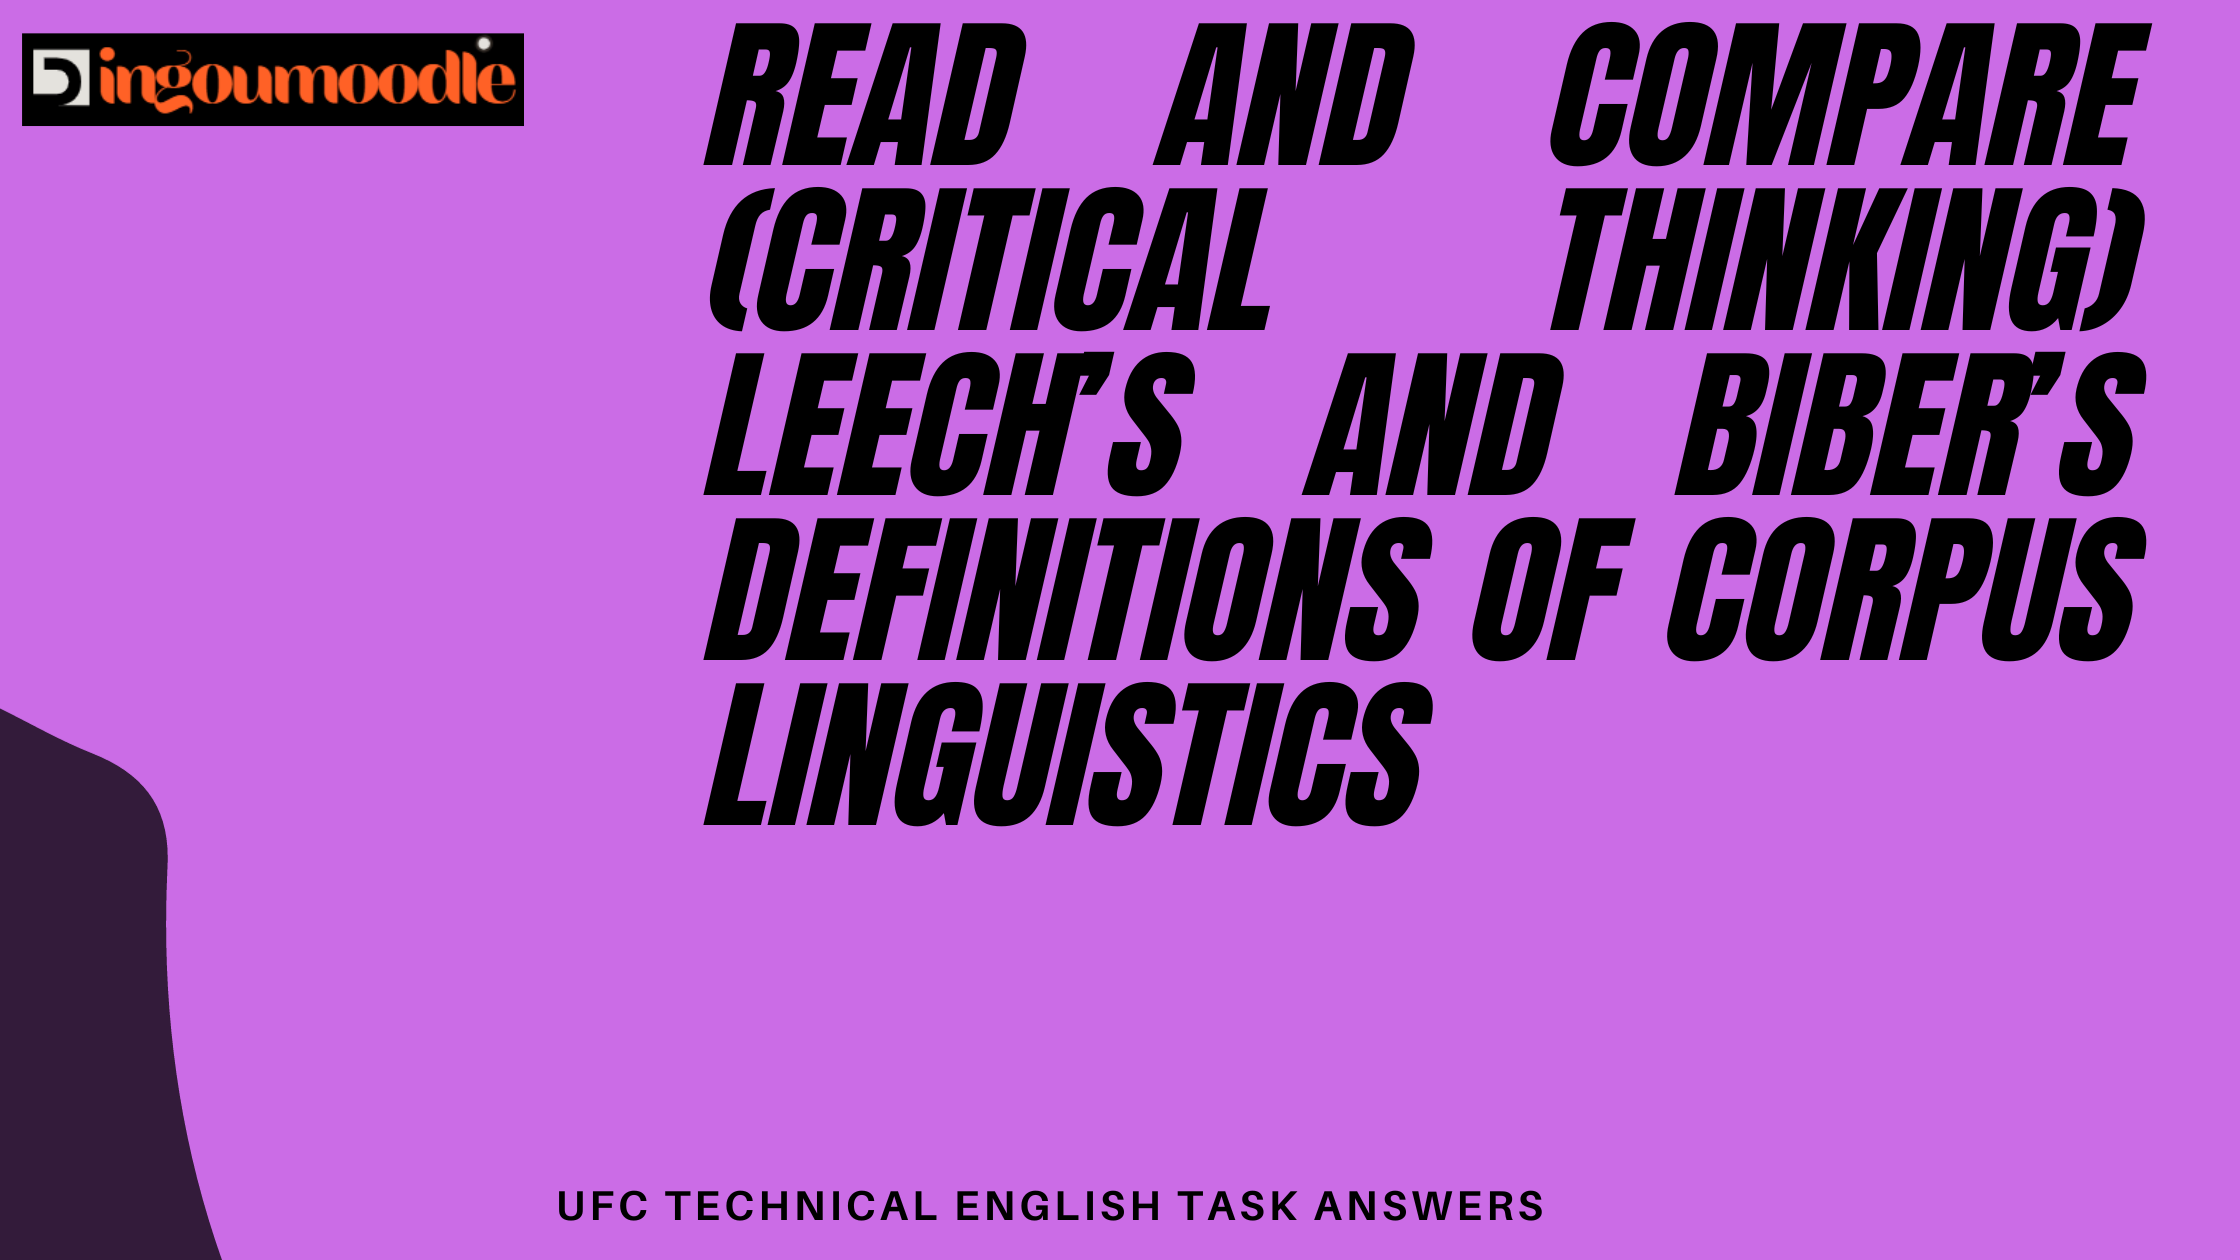 Read and Compare (critical thinking) Leech’s and Biber’s definitions of corpus linguistics.